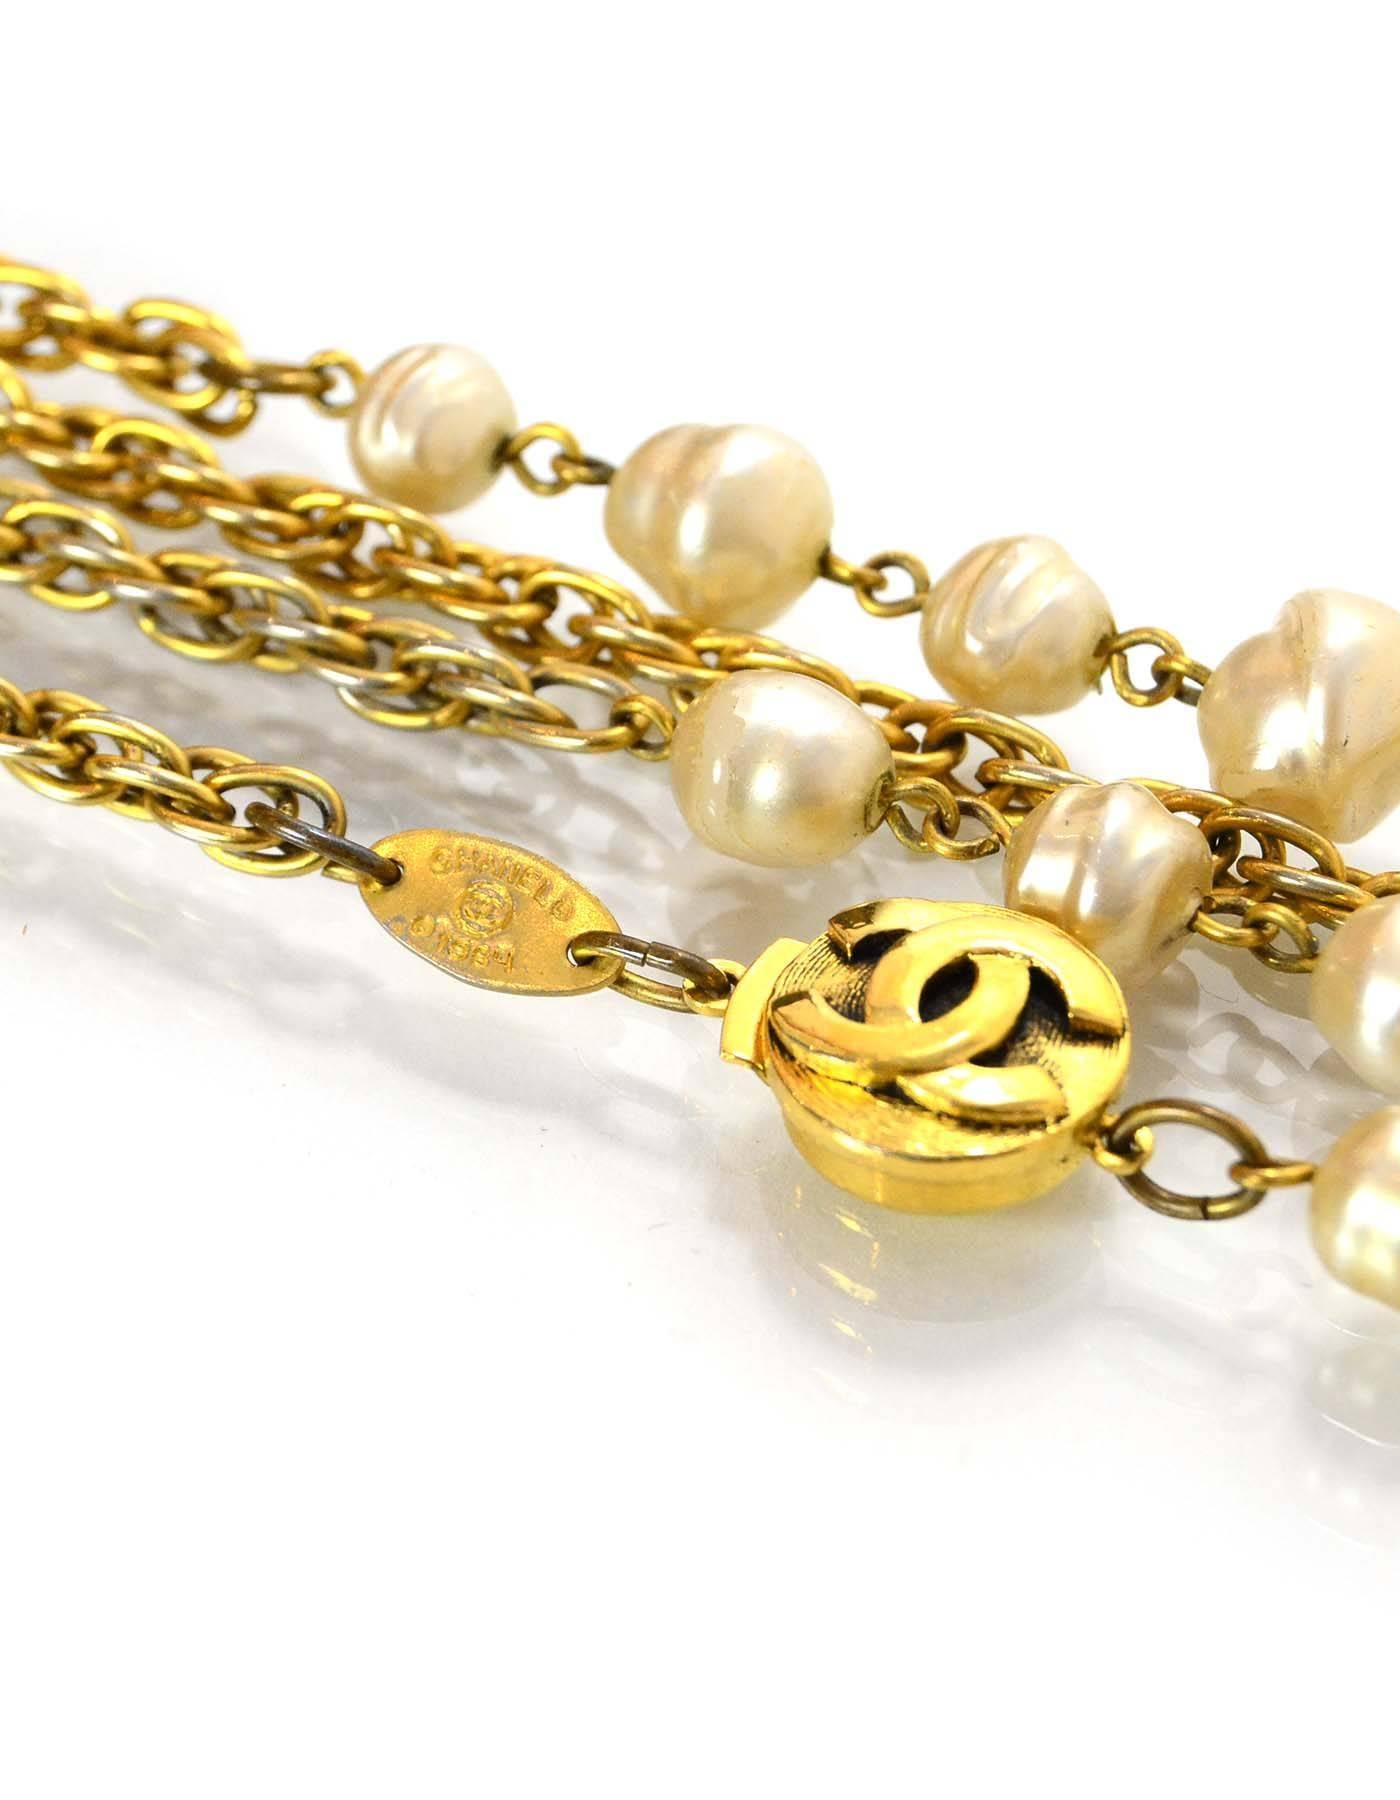 Women's Chanel Vintage Goldtone and Faux Pearl Long Necklace